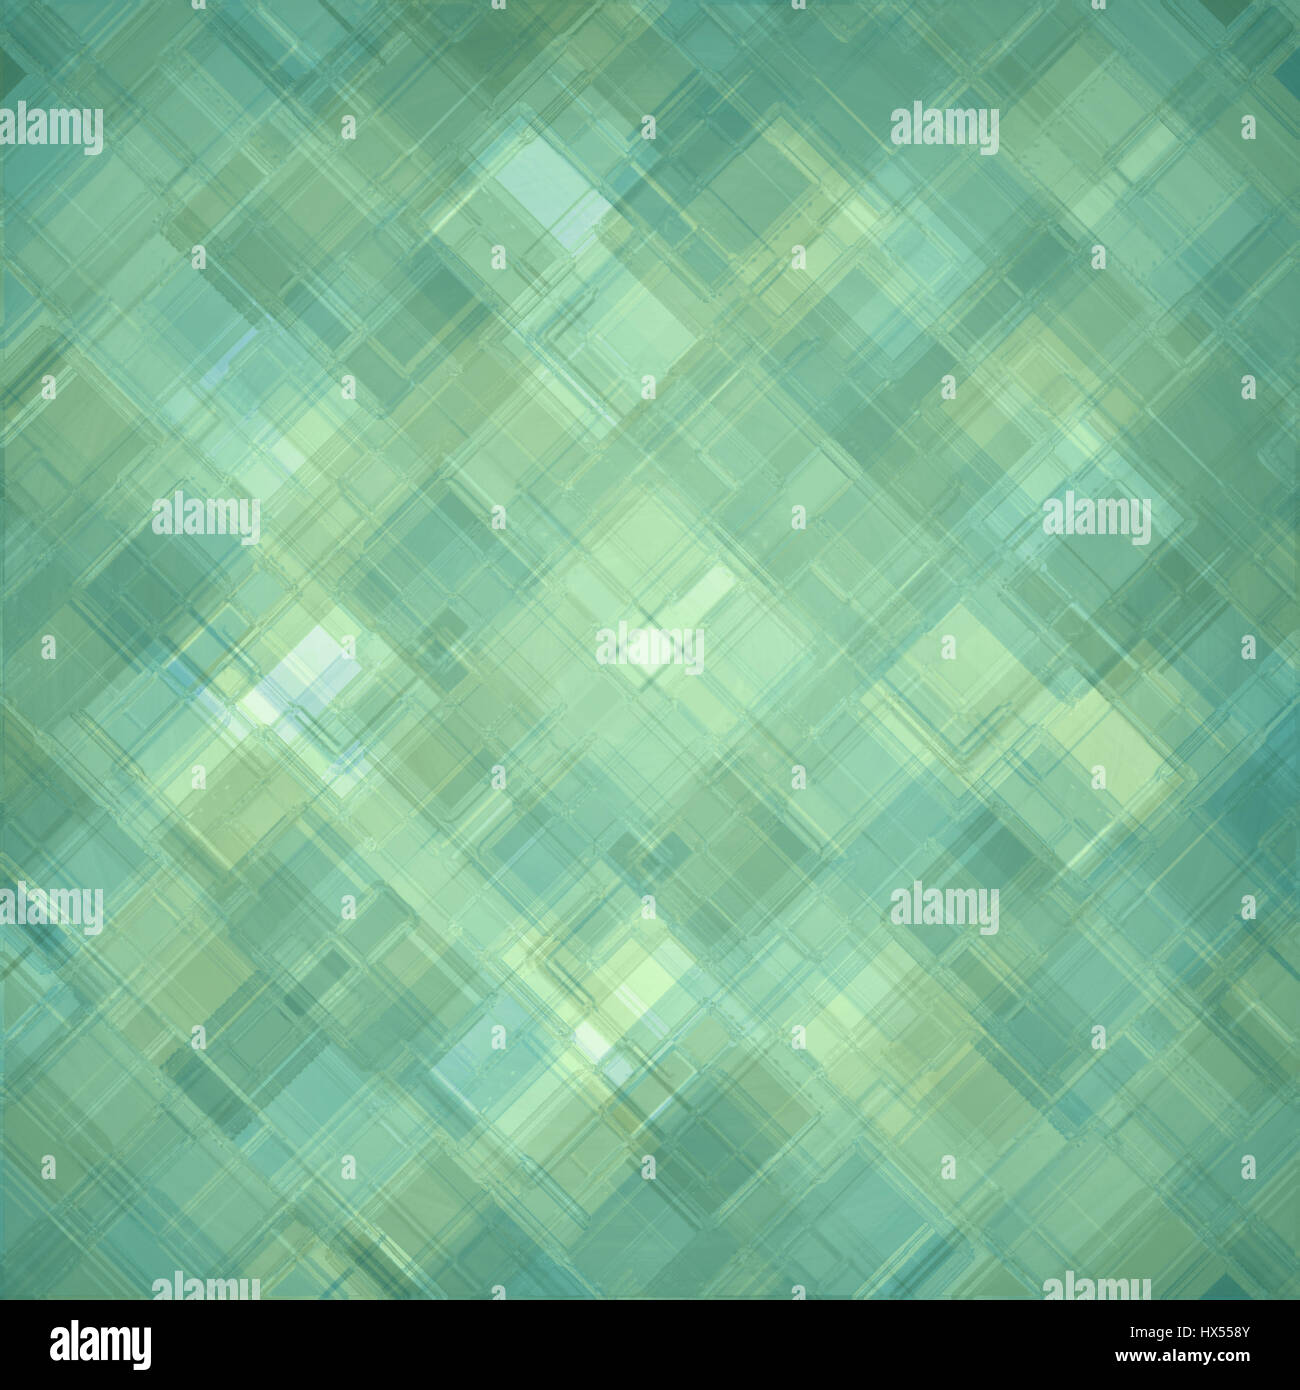 blue and green diamond block pattern background, abstract teal background design, techno background Stock Photo